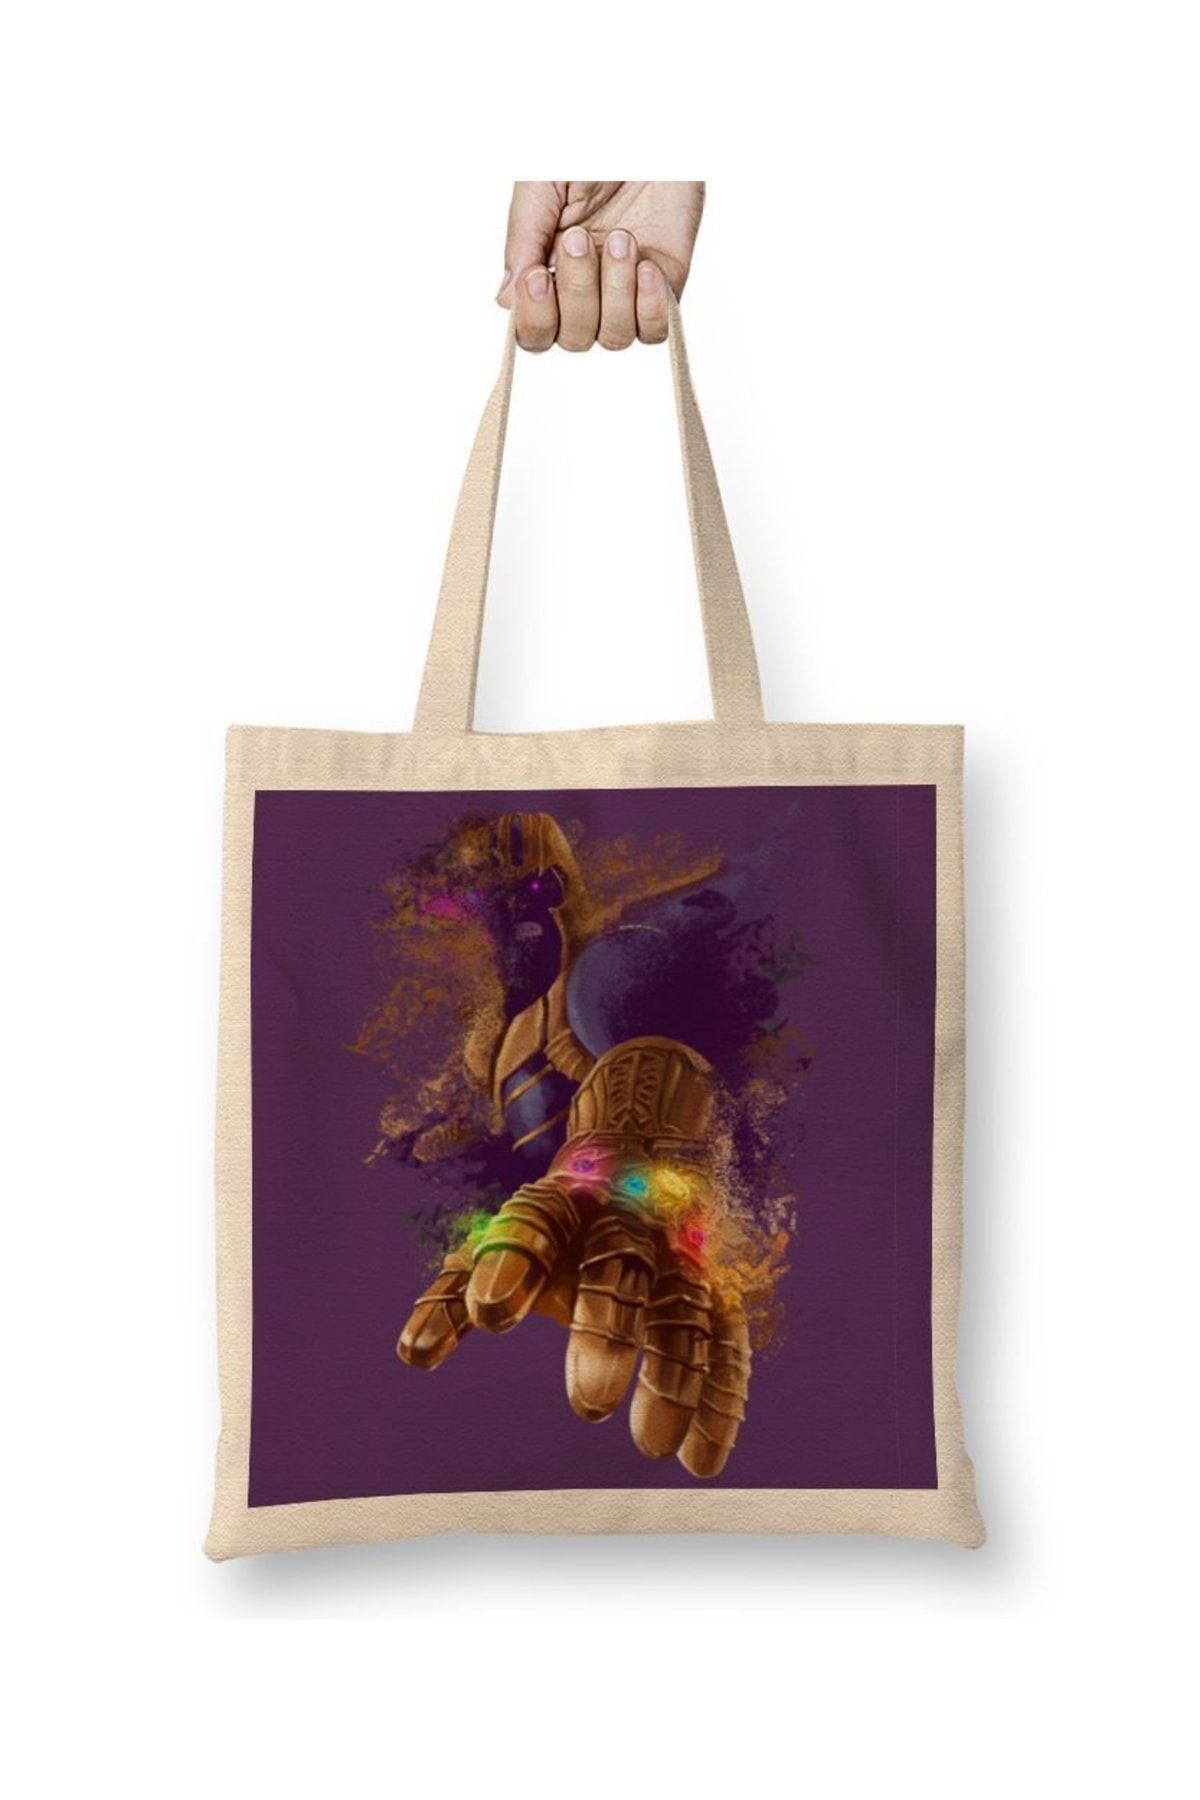 Thanos Tote Bag by JPW Artist - Pixels